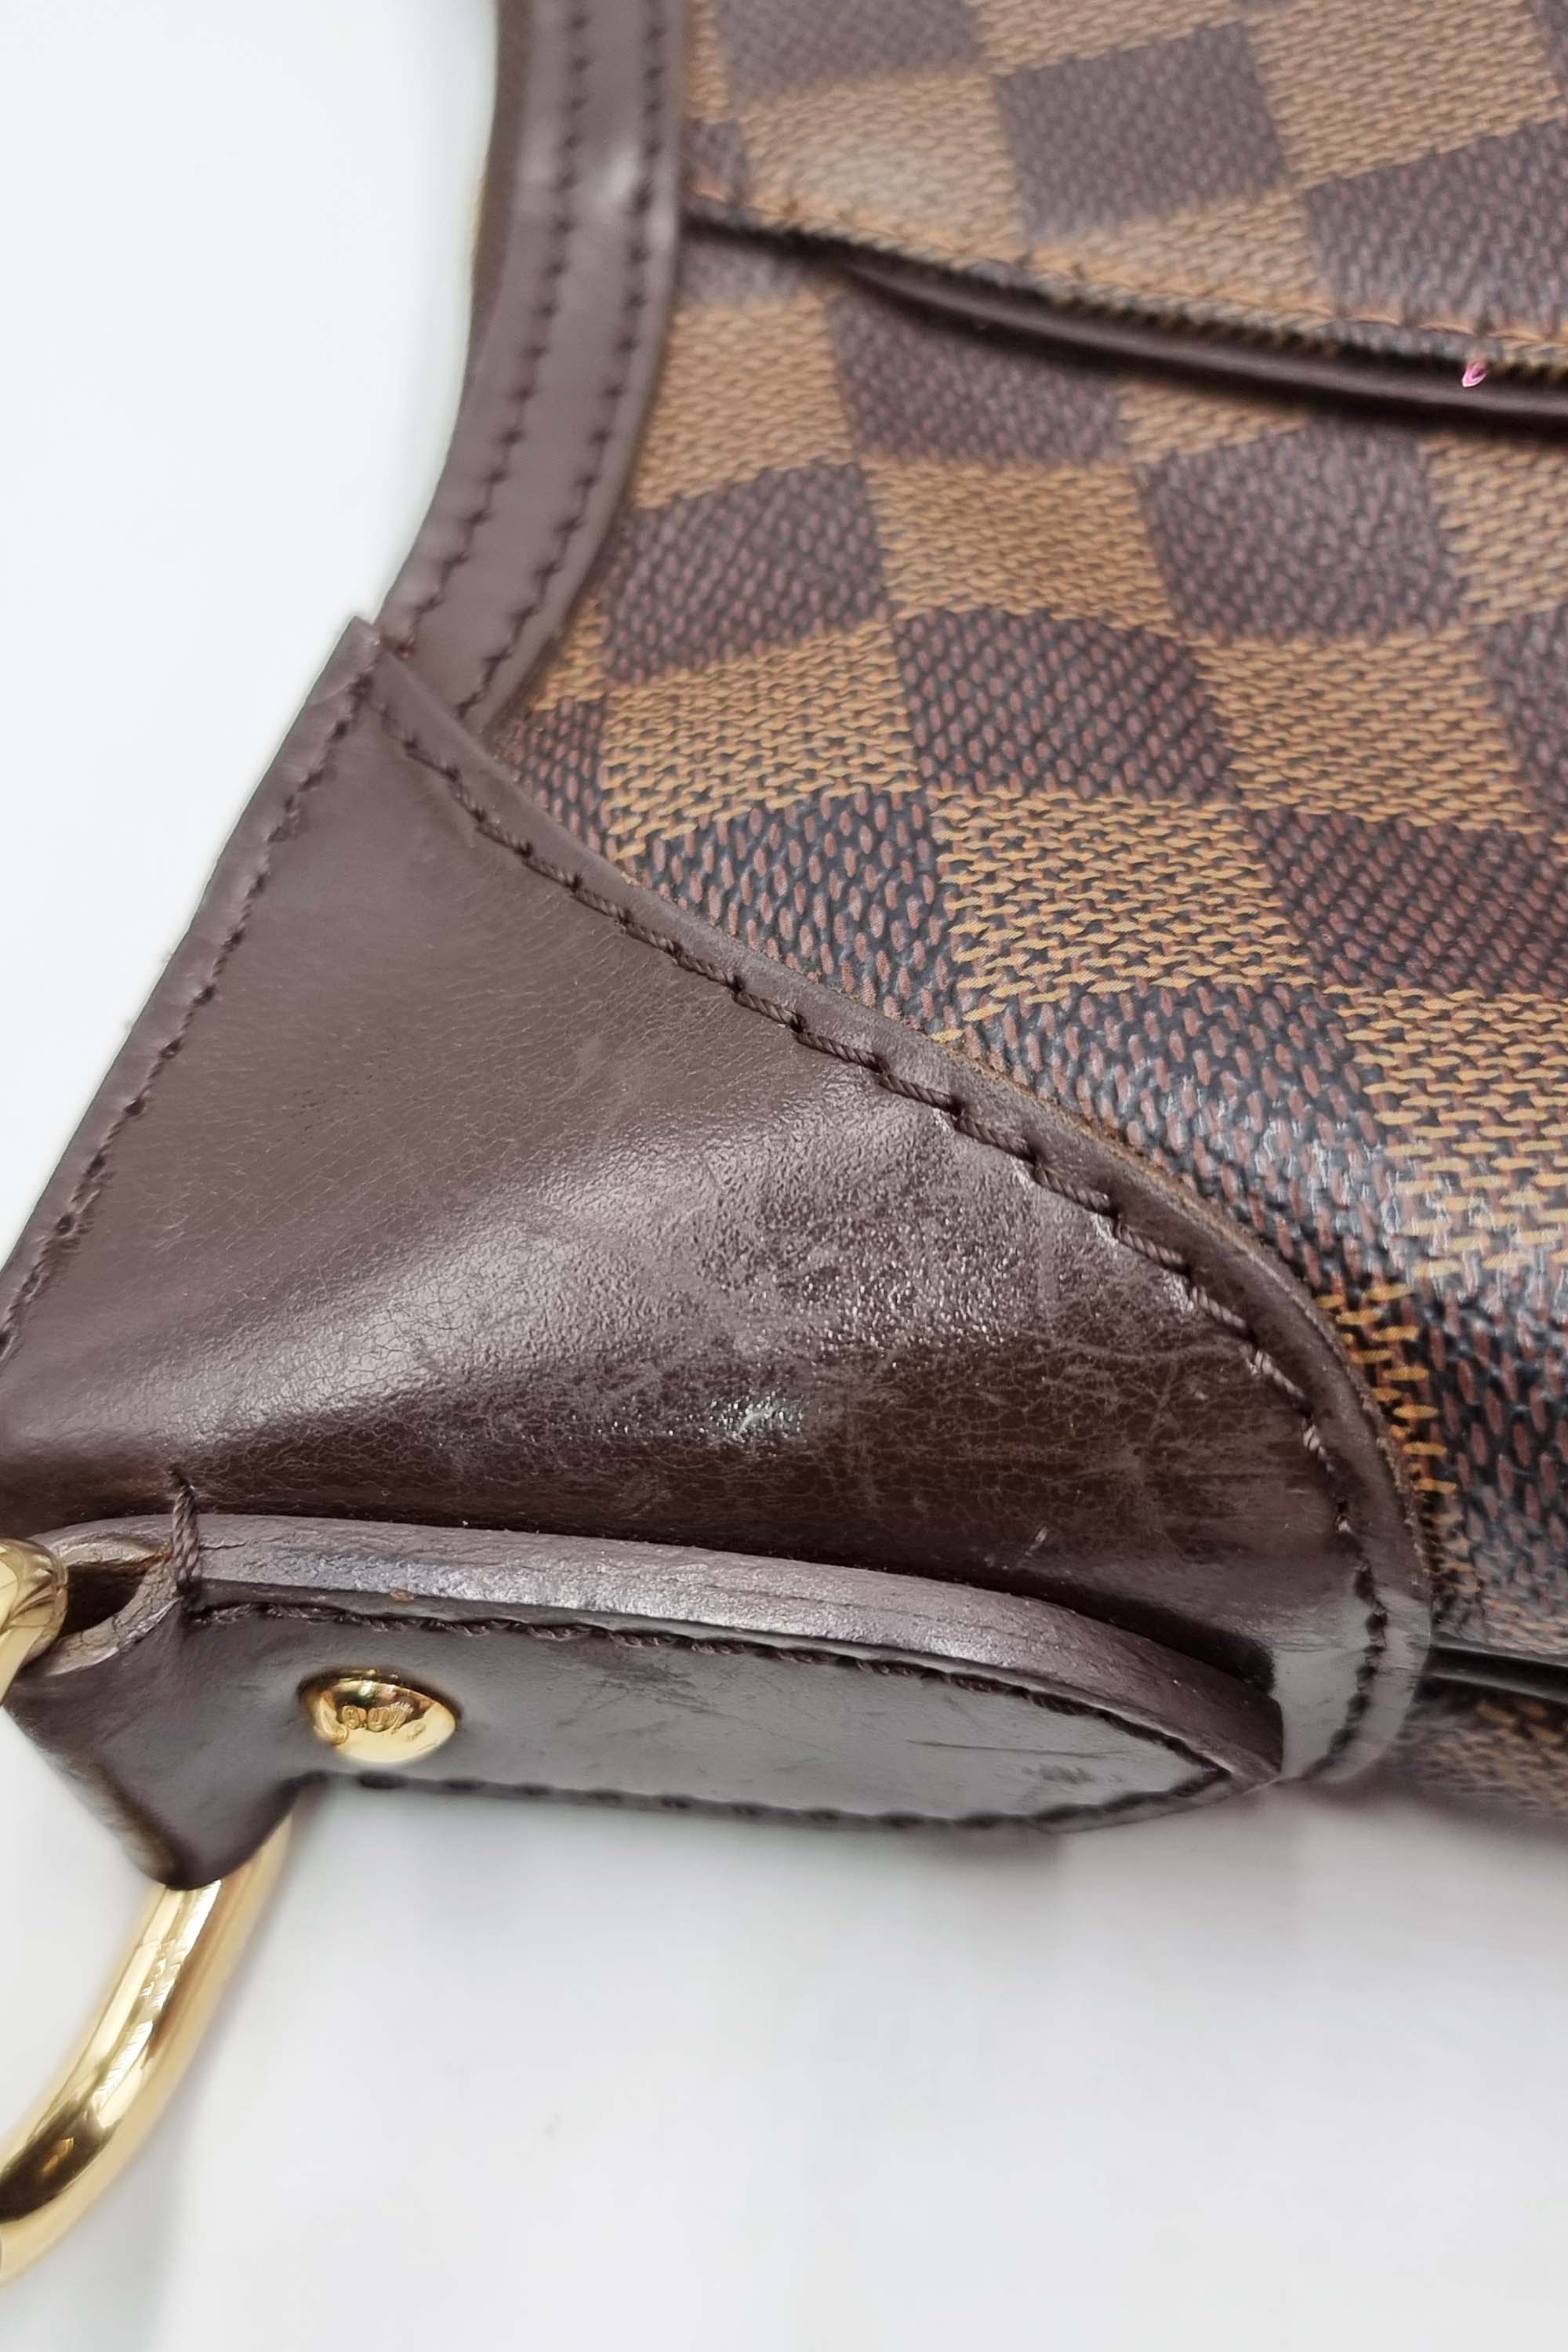 Louis Vuitton Thames PM Monogram ○ Labellov ○ Buy and Sell Authentic Luxury